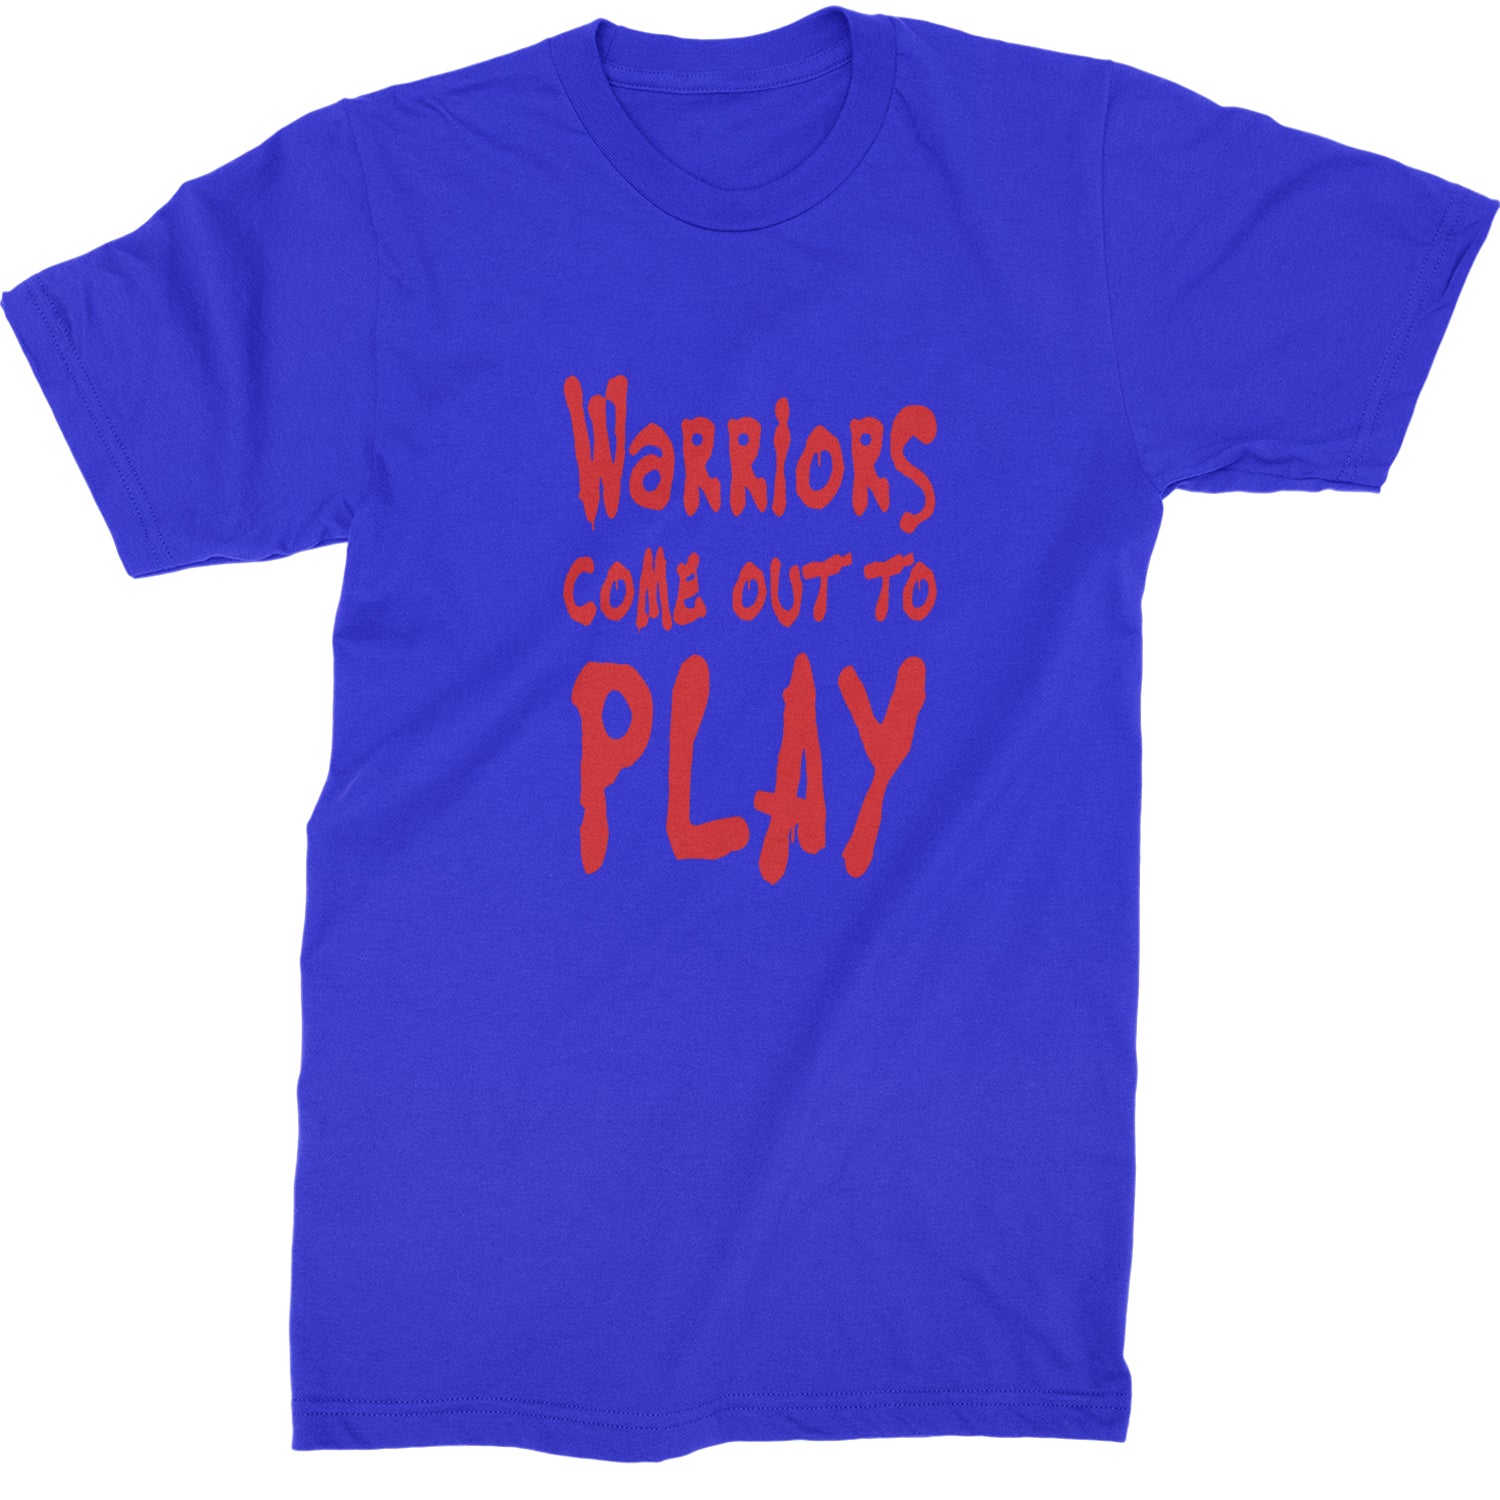 Warriors Come Out To Play  Mens T-shirt Royal Blue